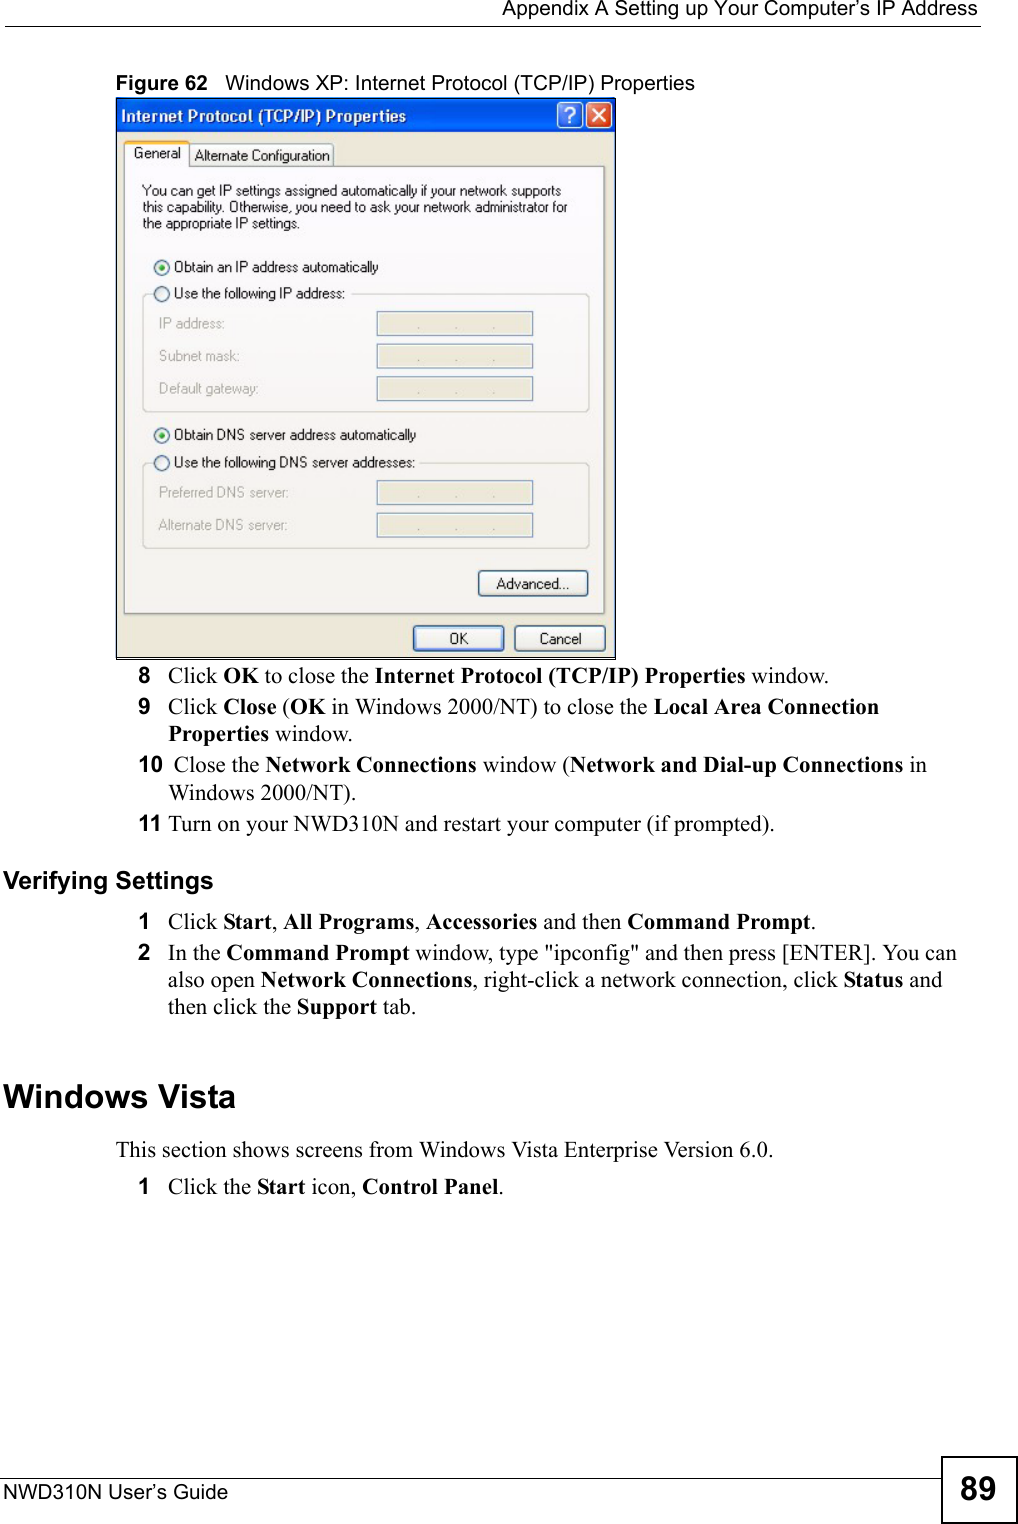  Appendix A Setting up Your Computer’s IP AddressNWD310N User’s Guide 89Figure 62   Windows XP: Internet Protocol (TCP/IP) Properties8Click OK to close the Internet Protocol (TCP/IP) Properties window.9Click Close (OK in Windows 2000/NT) to close the Local Area Connection Properties window.10  Close the Network Connections window (Network and Dial-up Connections in Windows 2000/NT).11 Turn on your NWD310N and restart your computer (if prompted).Verifying Settings1Click Start, All Programs, Accessories and then Command Prompt.2In the Command Prompt window, type &quot;ipconfig&quot; and then press [ENTER]. You can also open Network Connections, right-click a network connection, click Status and then click the Support tab.Windows VistaThis section shows screens from Windows Vista Enterprise Version 6.0.1Click the Start icon, Control Panel.